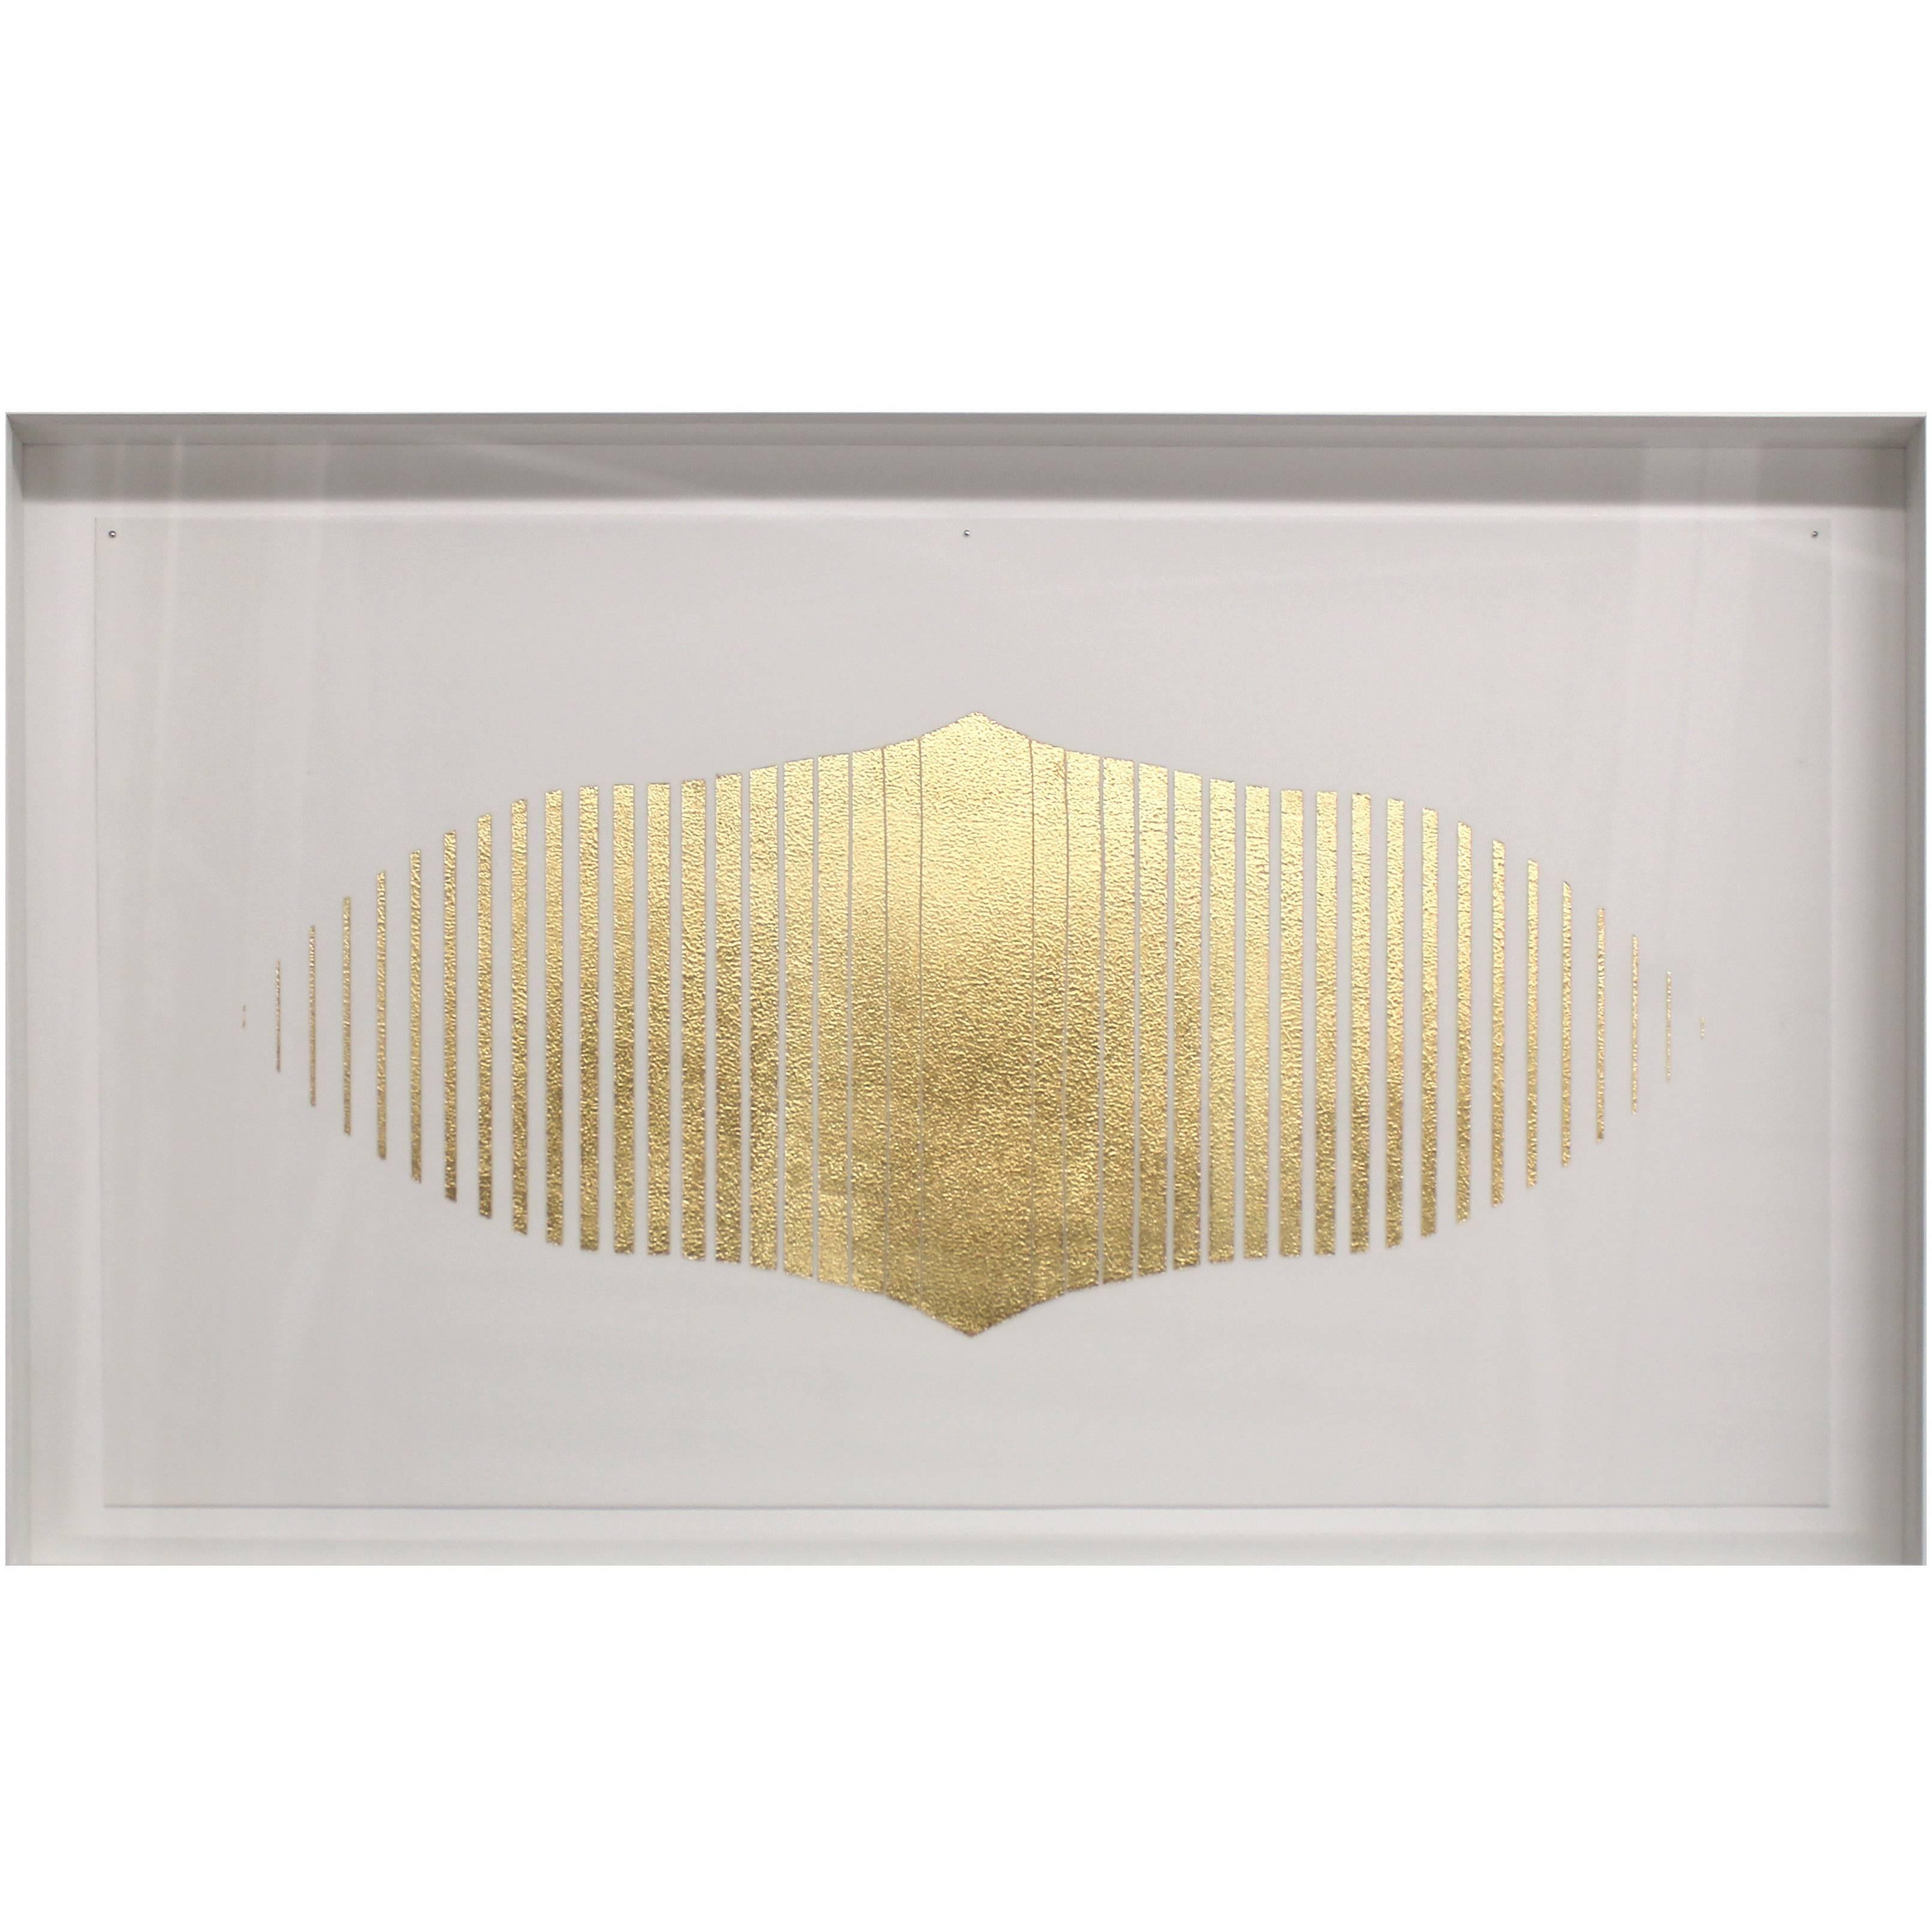 Label Gold Leafed Handmade Artwork on Cotton Rag Paper, Wall Hung Art For Sale